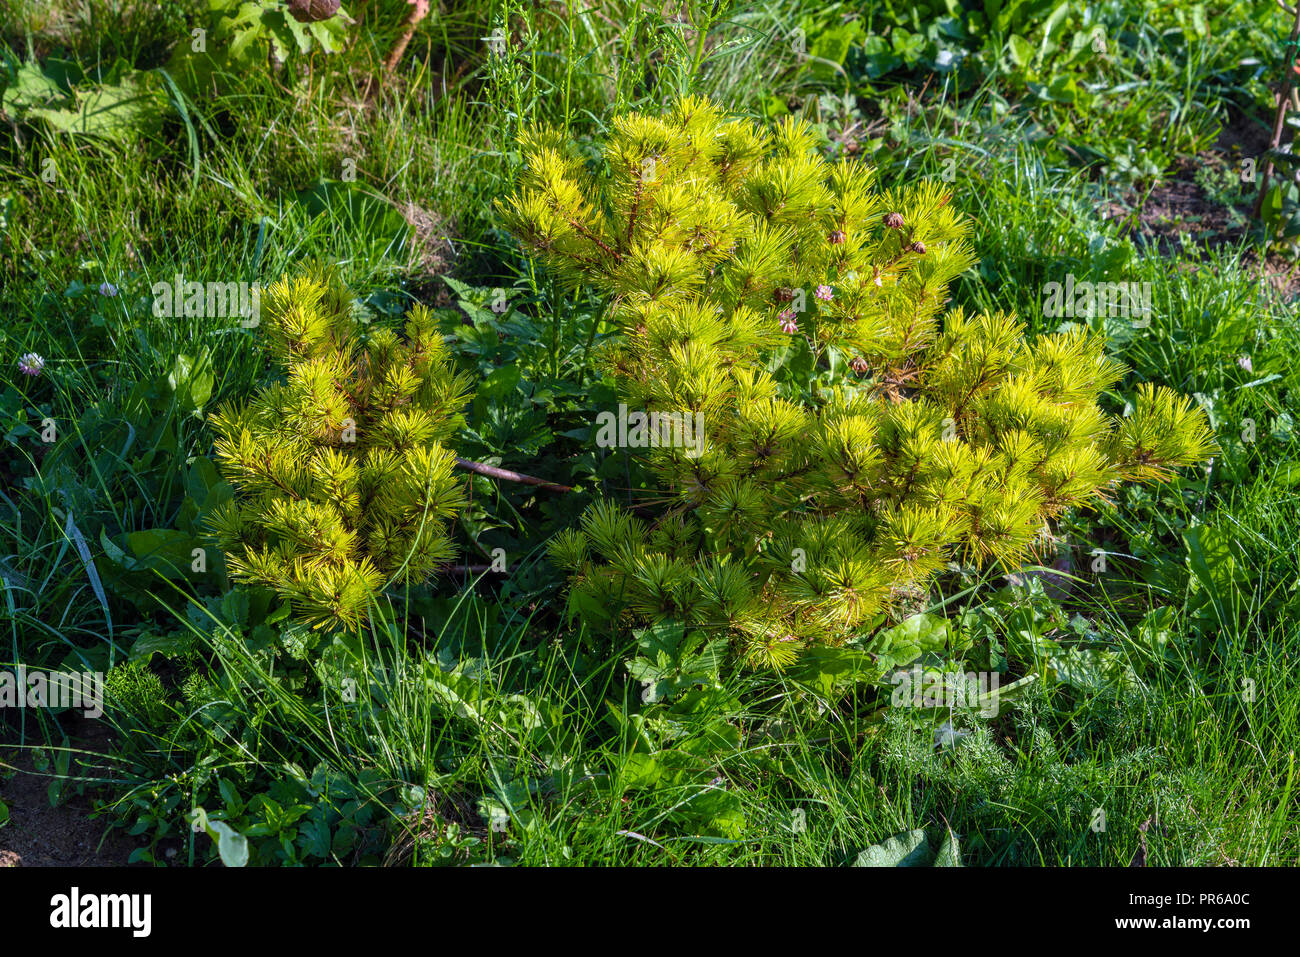 Seedling of a young Weymouth pine in a summer garden, natural landscape design and gardening Stock Photo